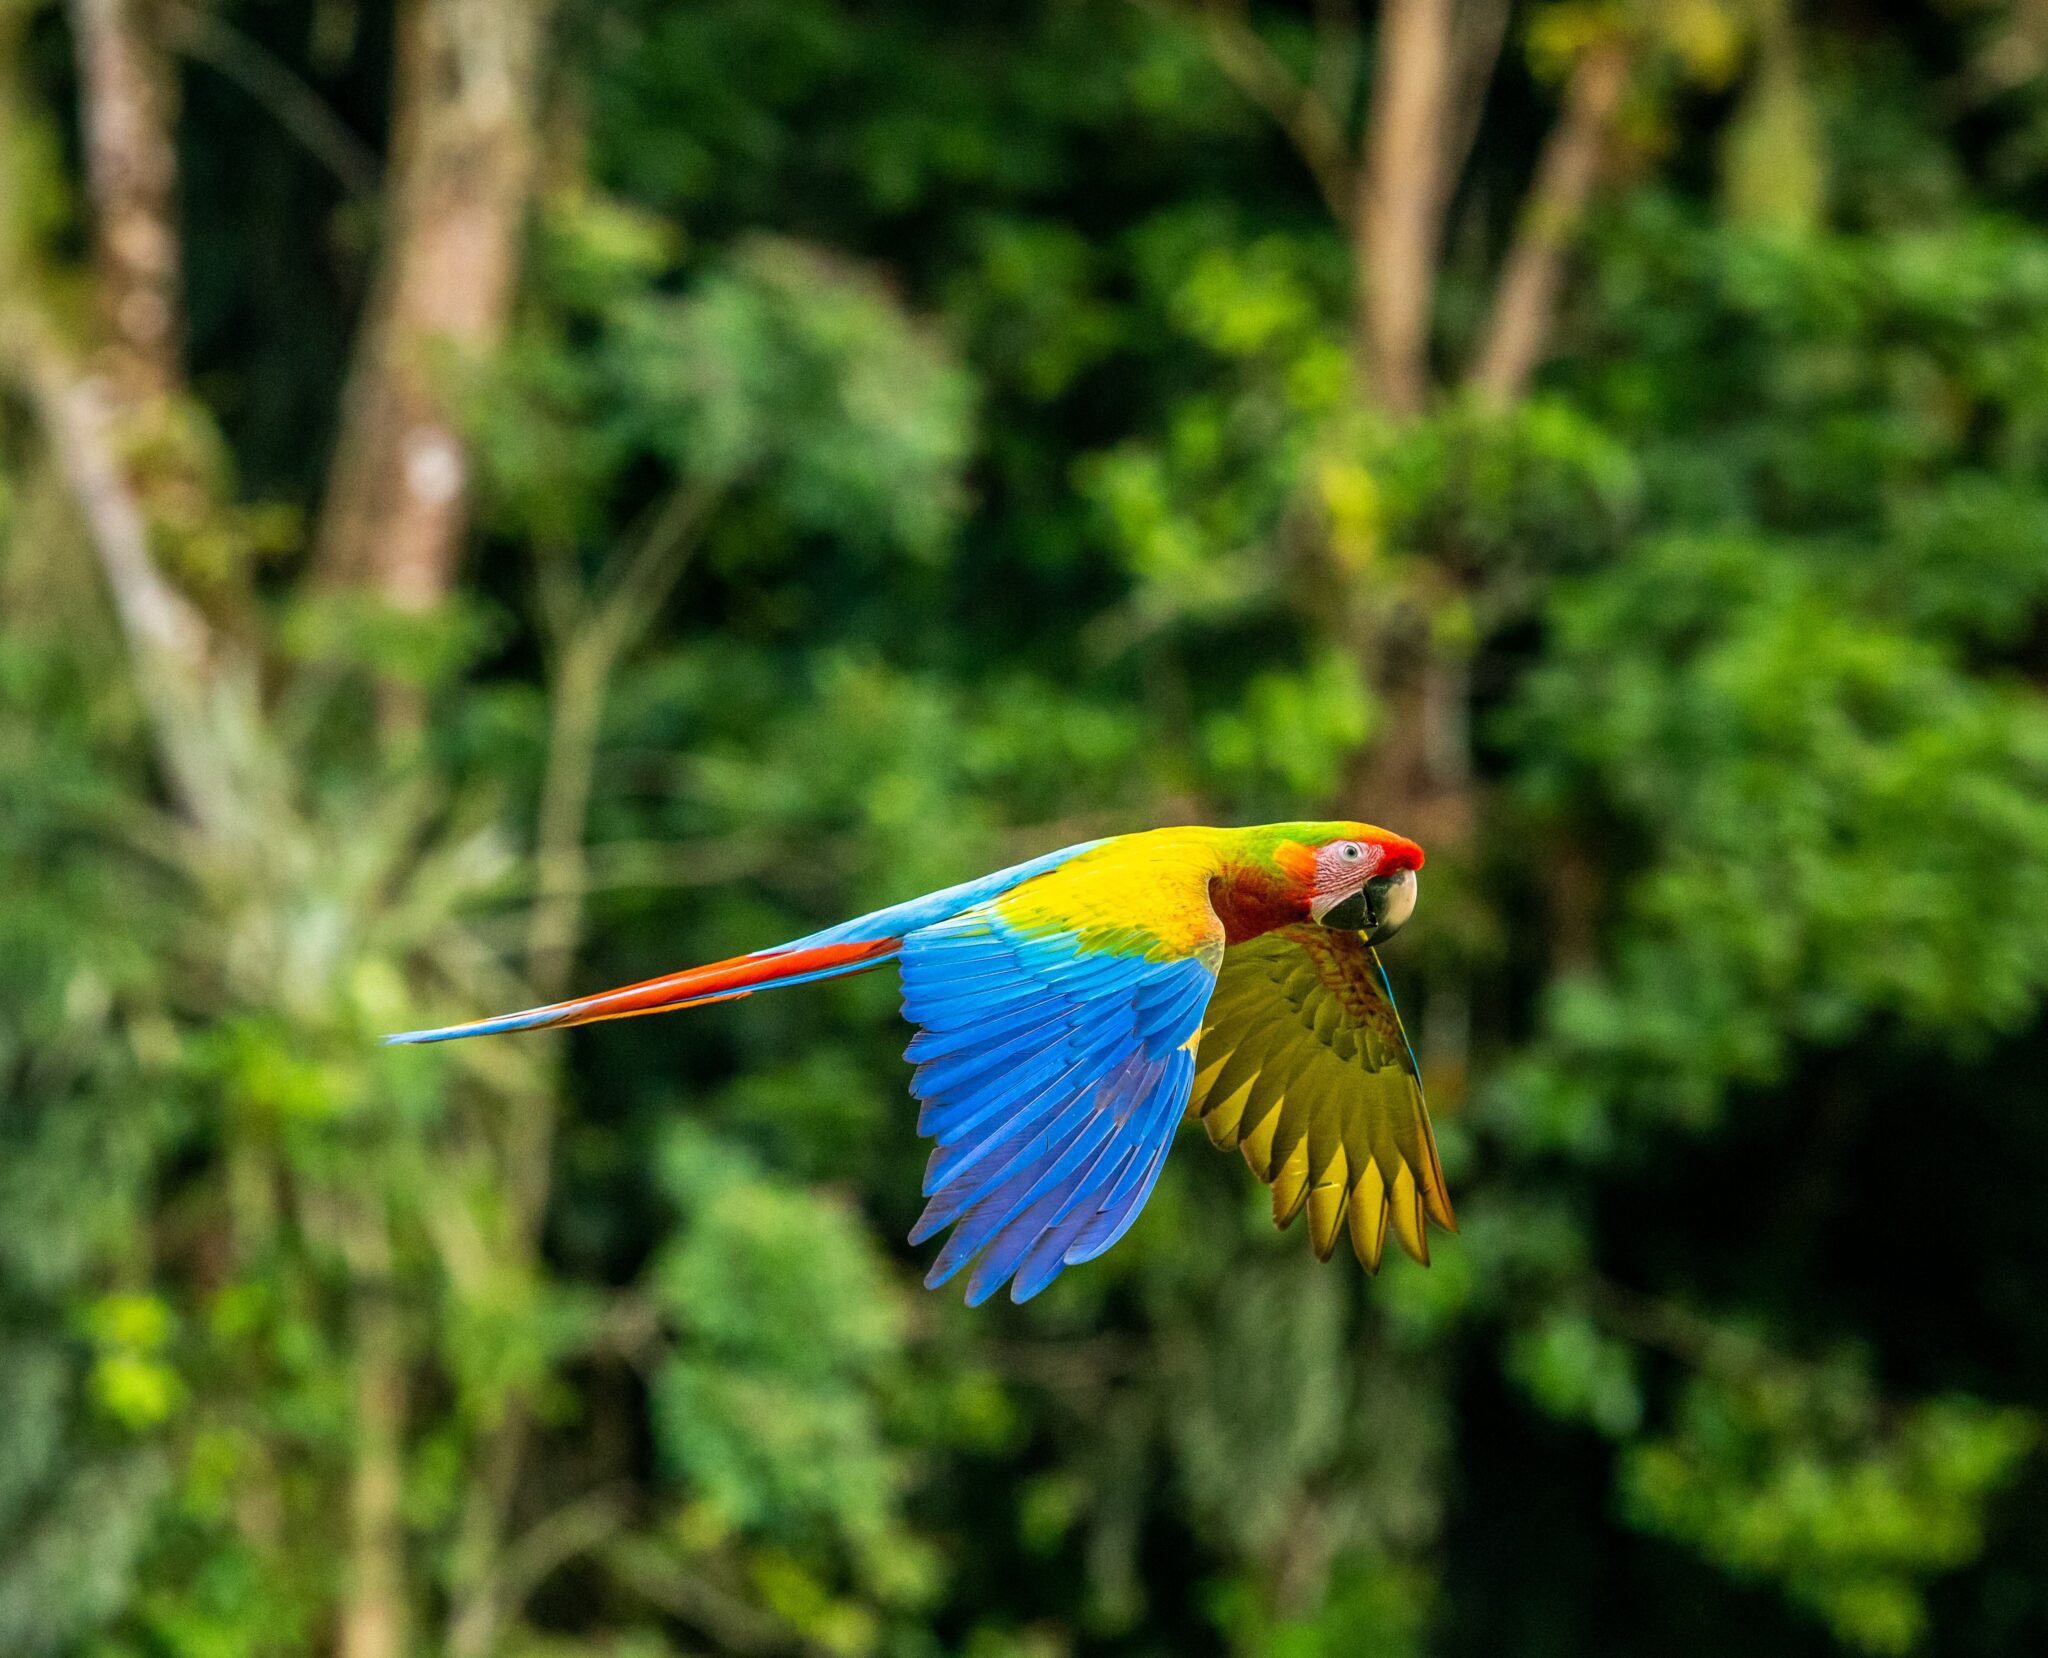 Stock image of a parrot flying in Costa Rica to accomapny article on finding a good corporate lawyer or legal firm